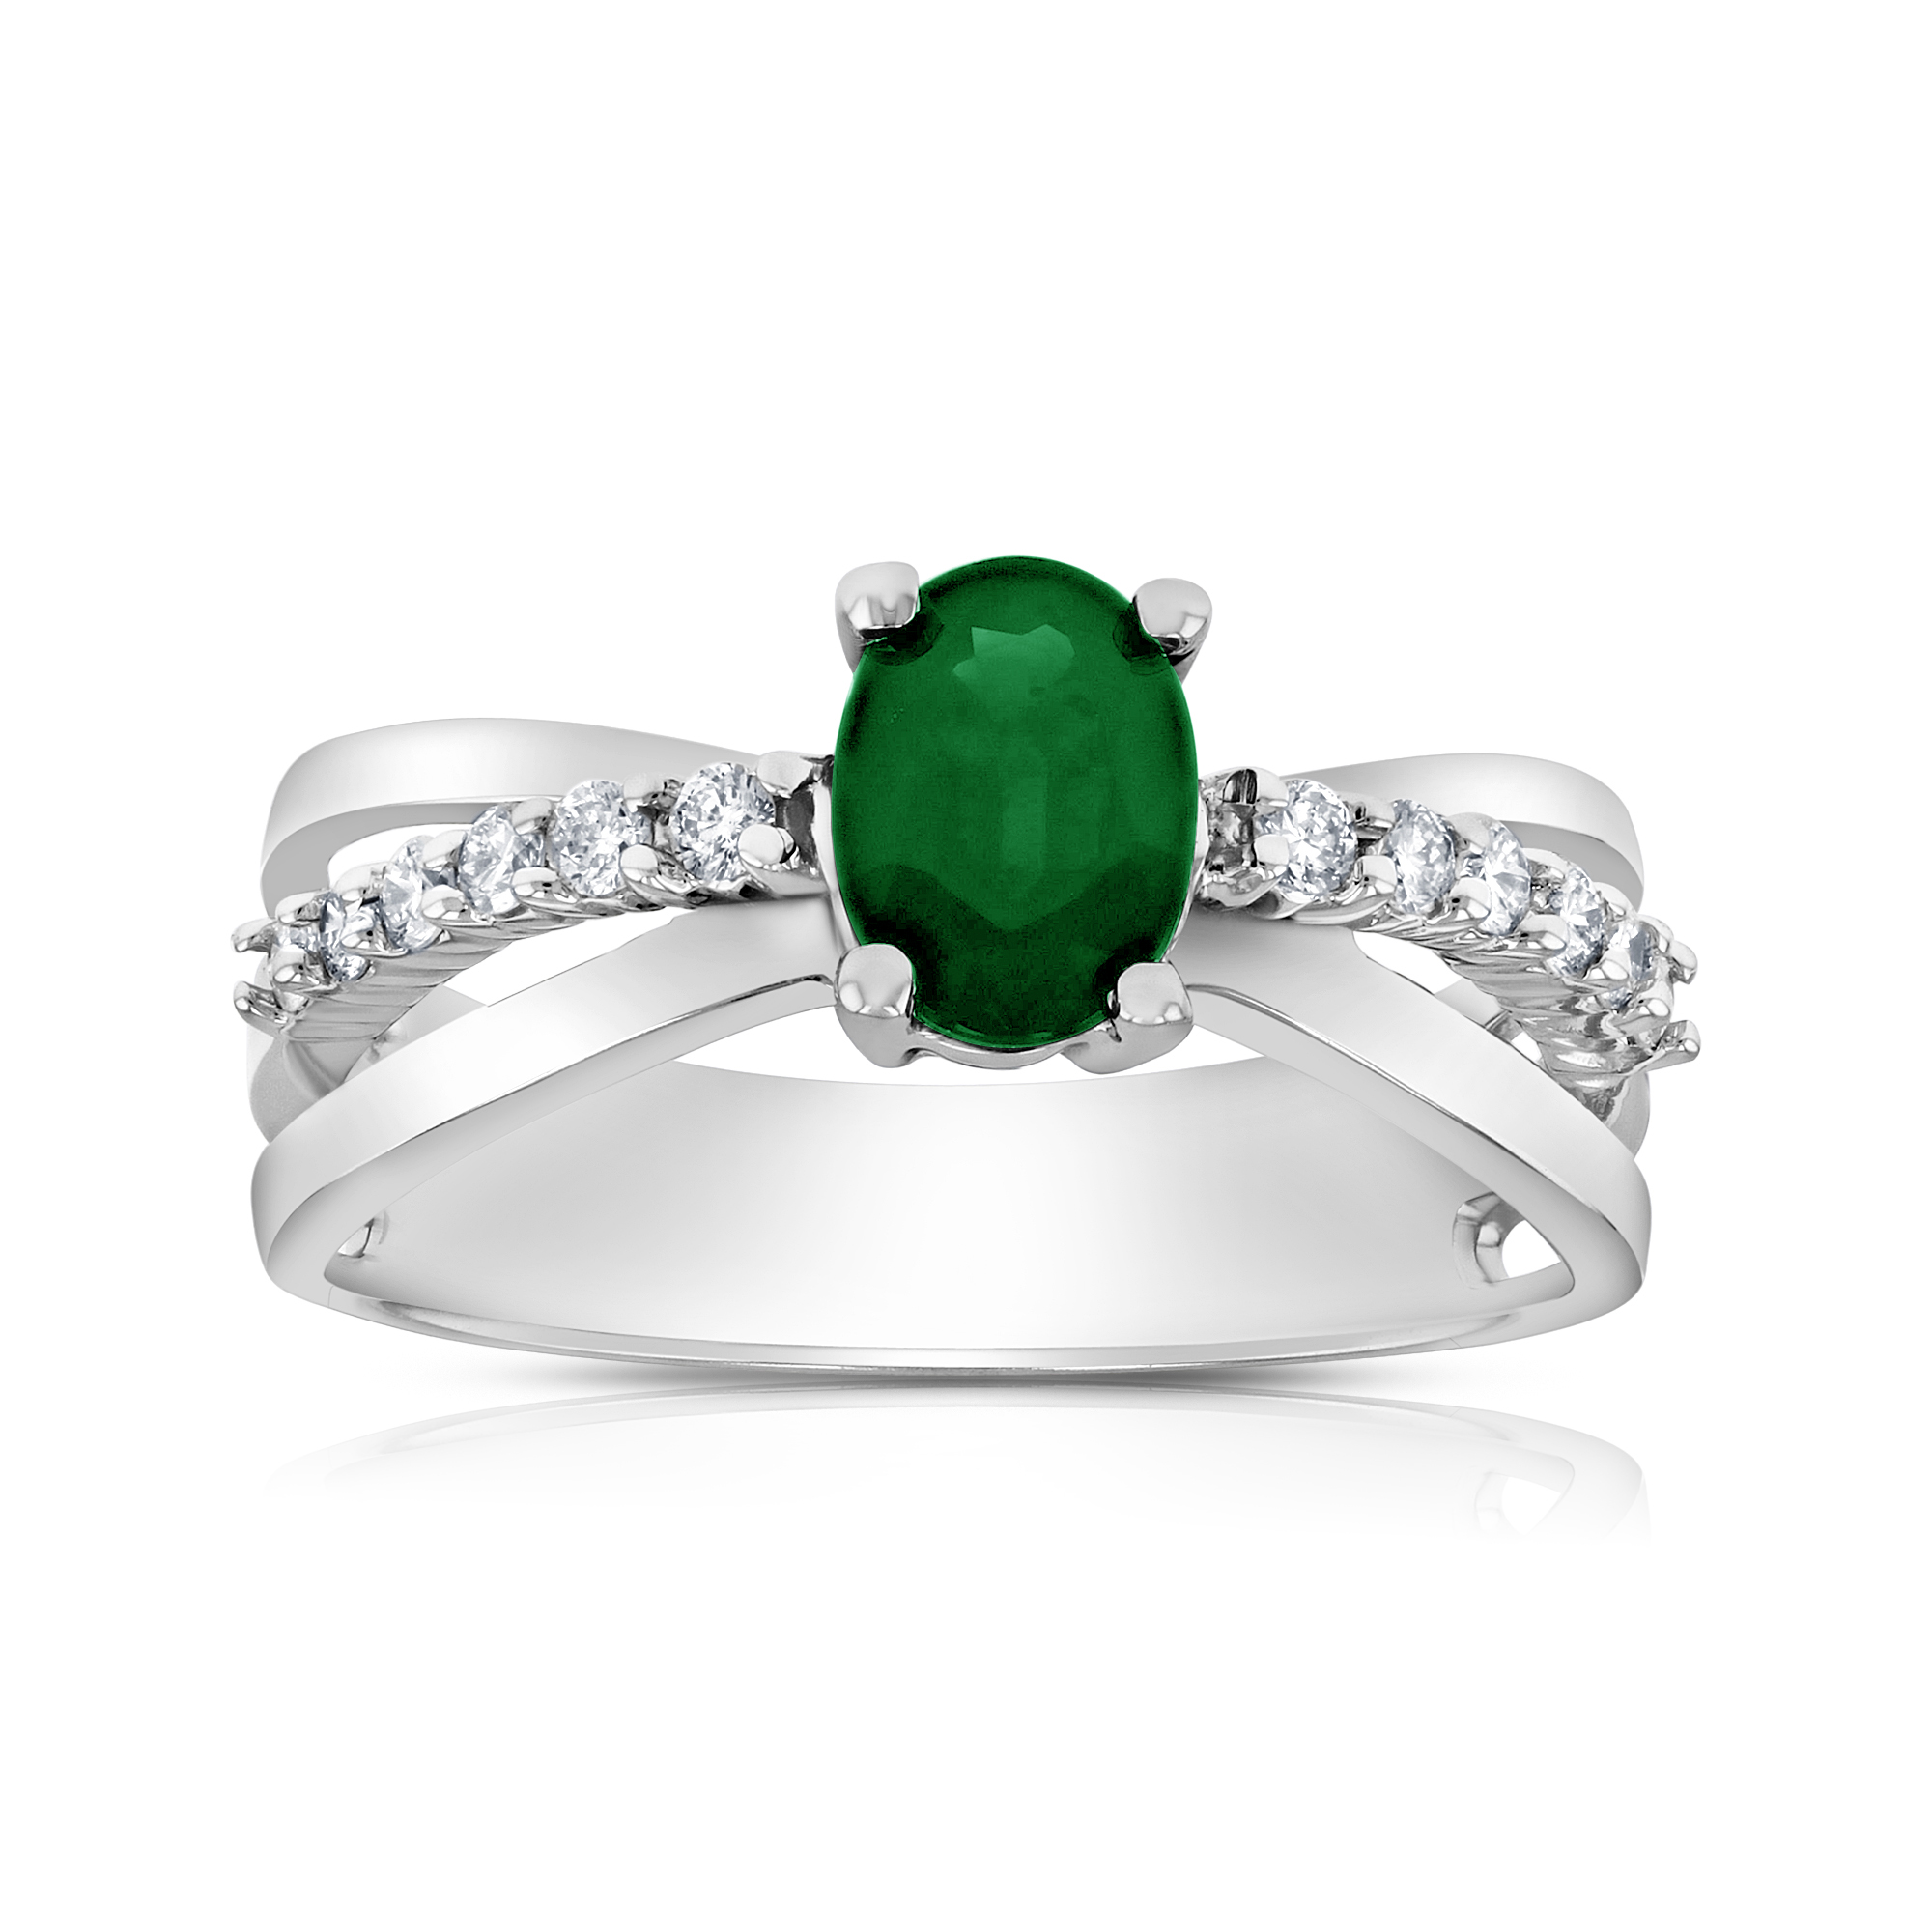 View 0.20ctw Diamond and Emerald Ring in 14k Gold